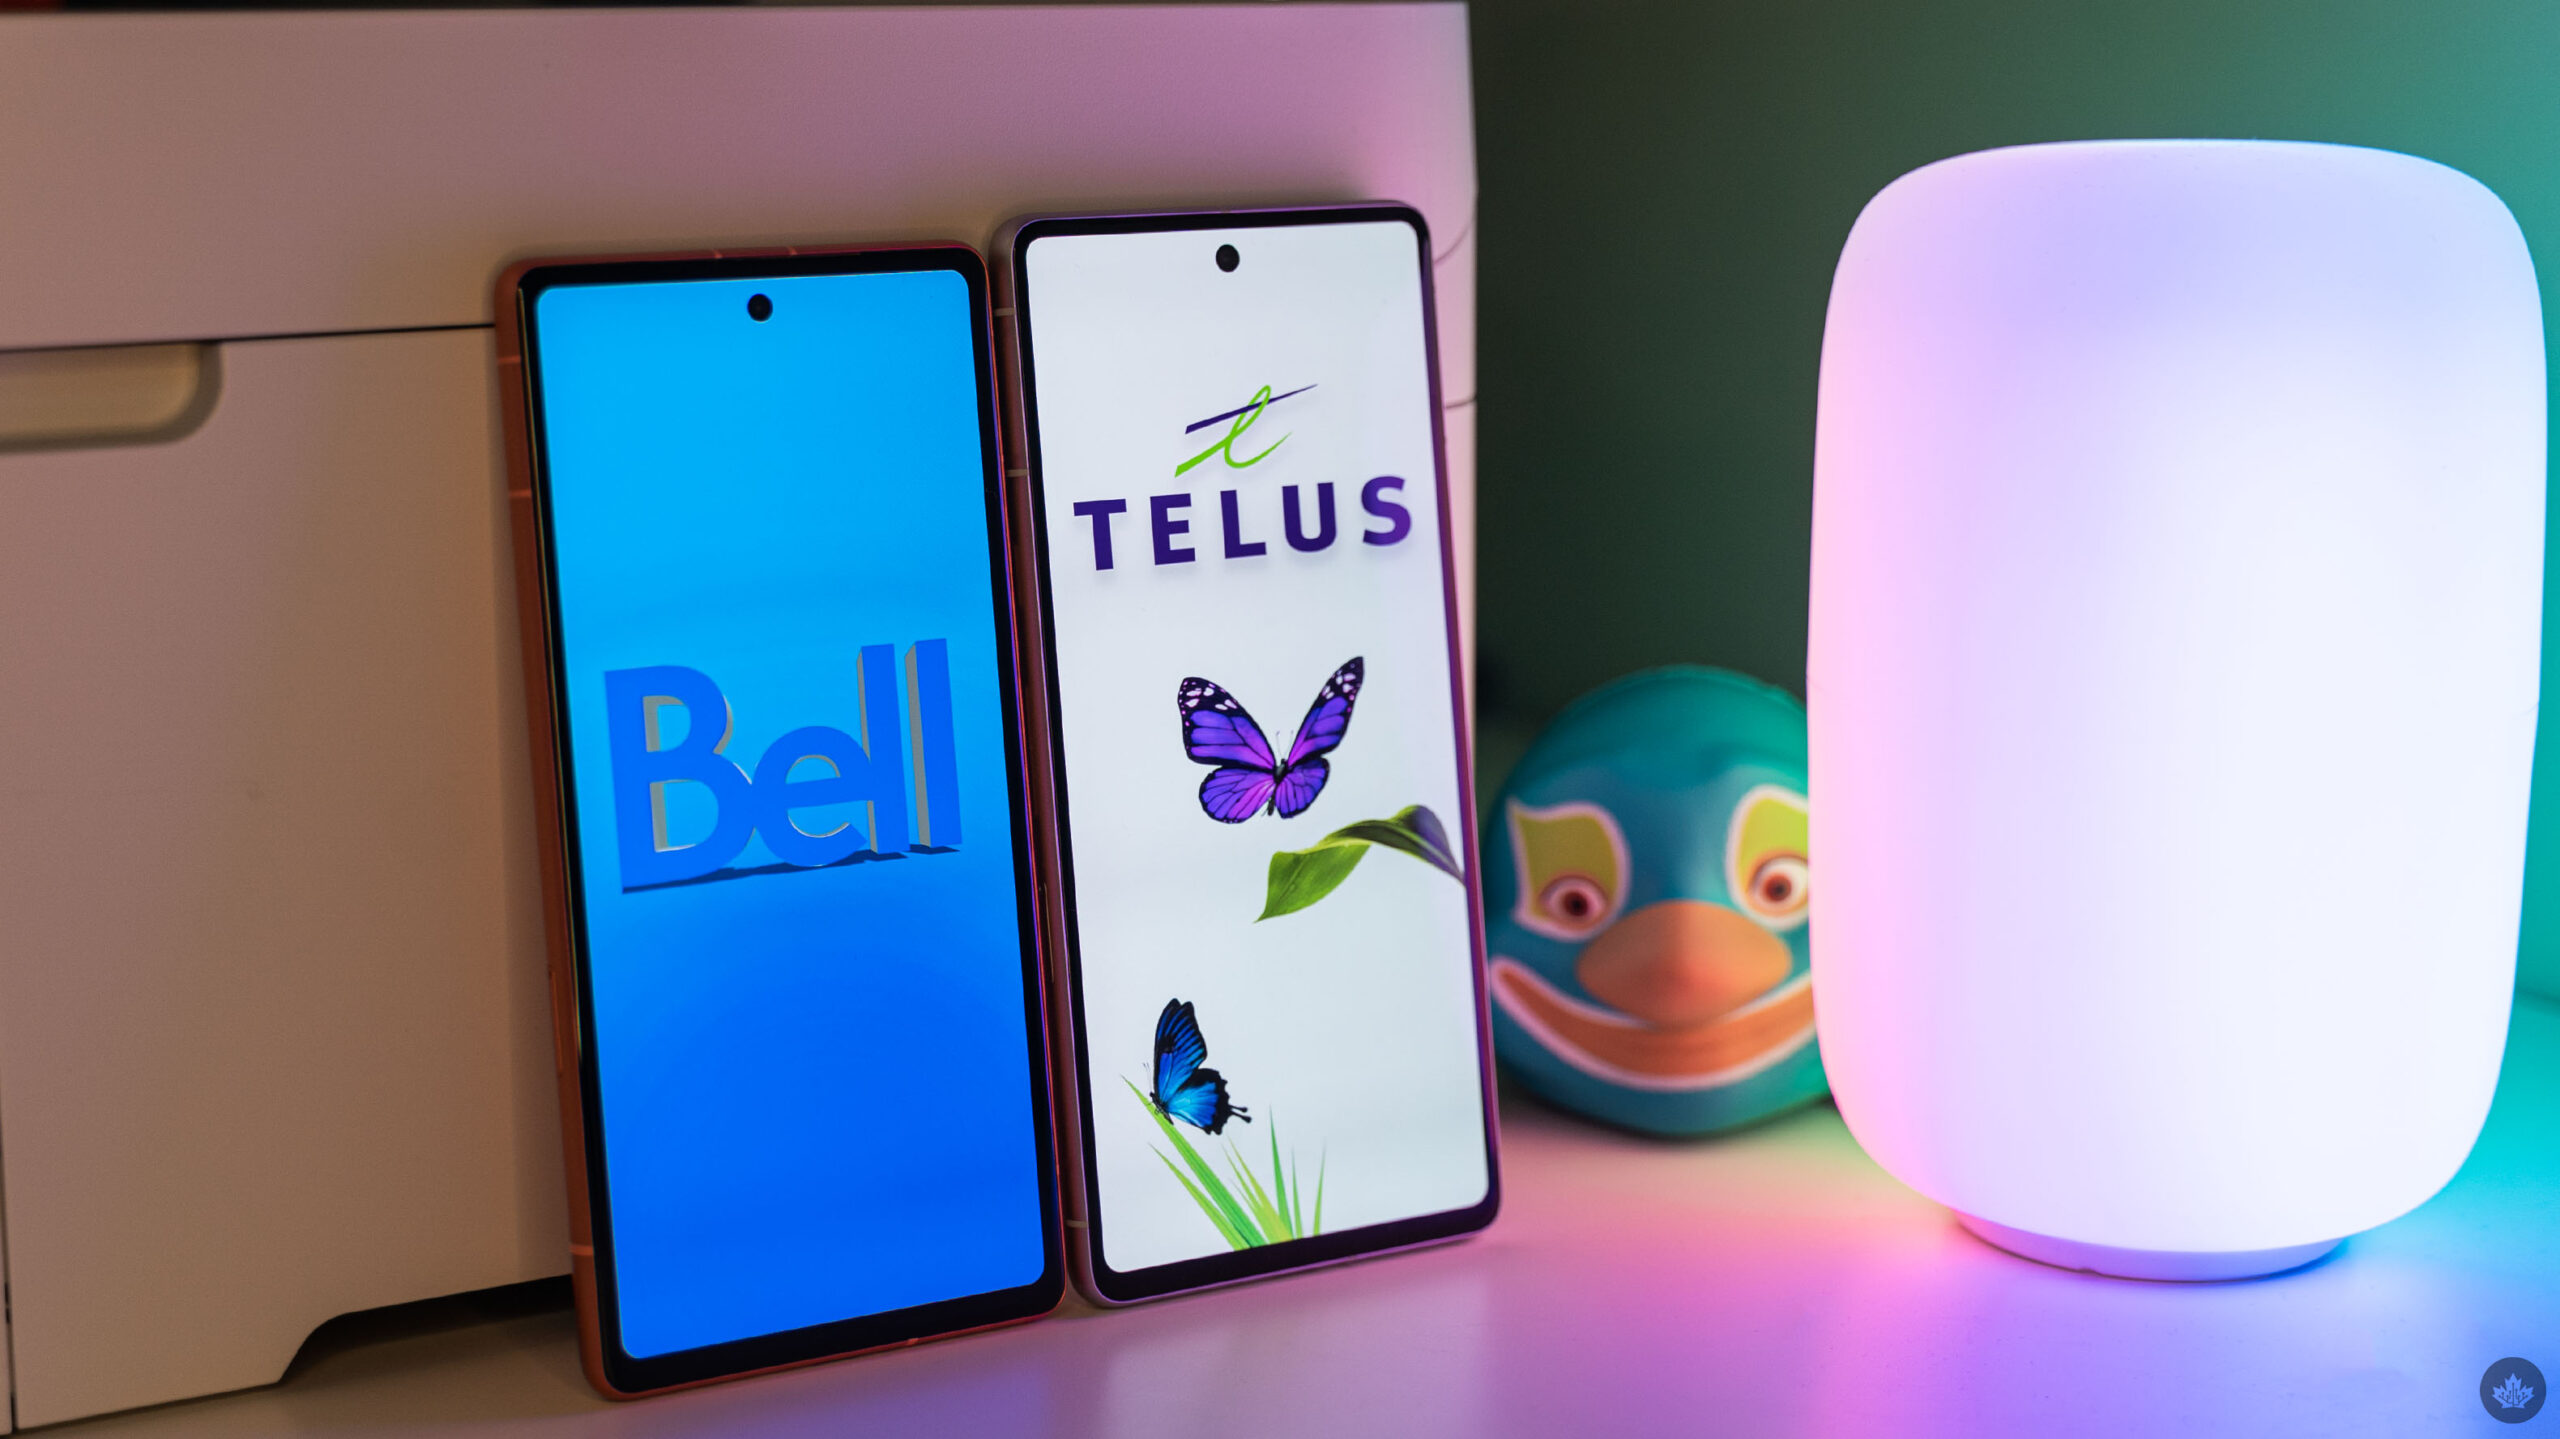 Bell and Telus logos on smartphones.